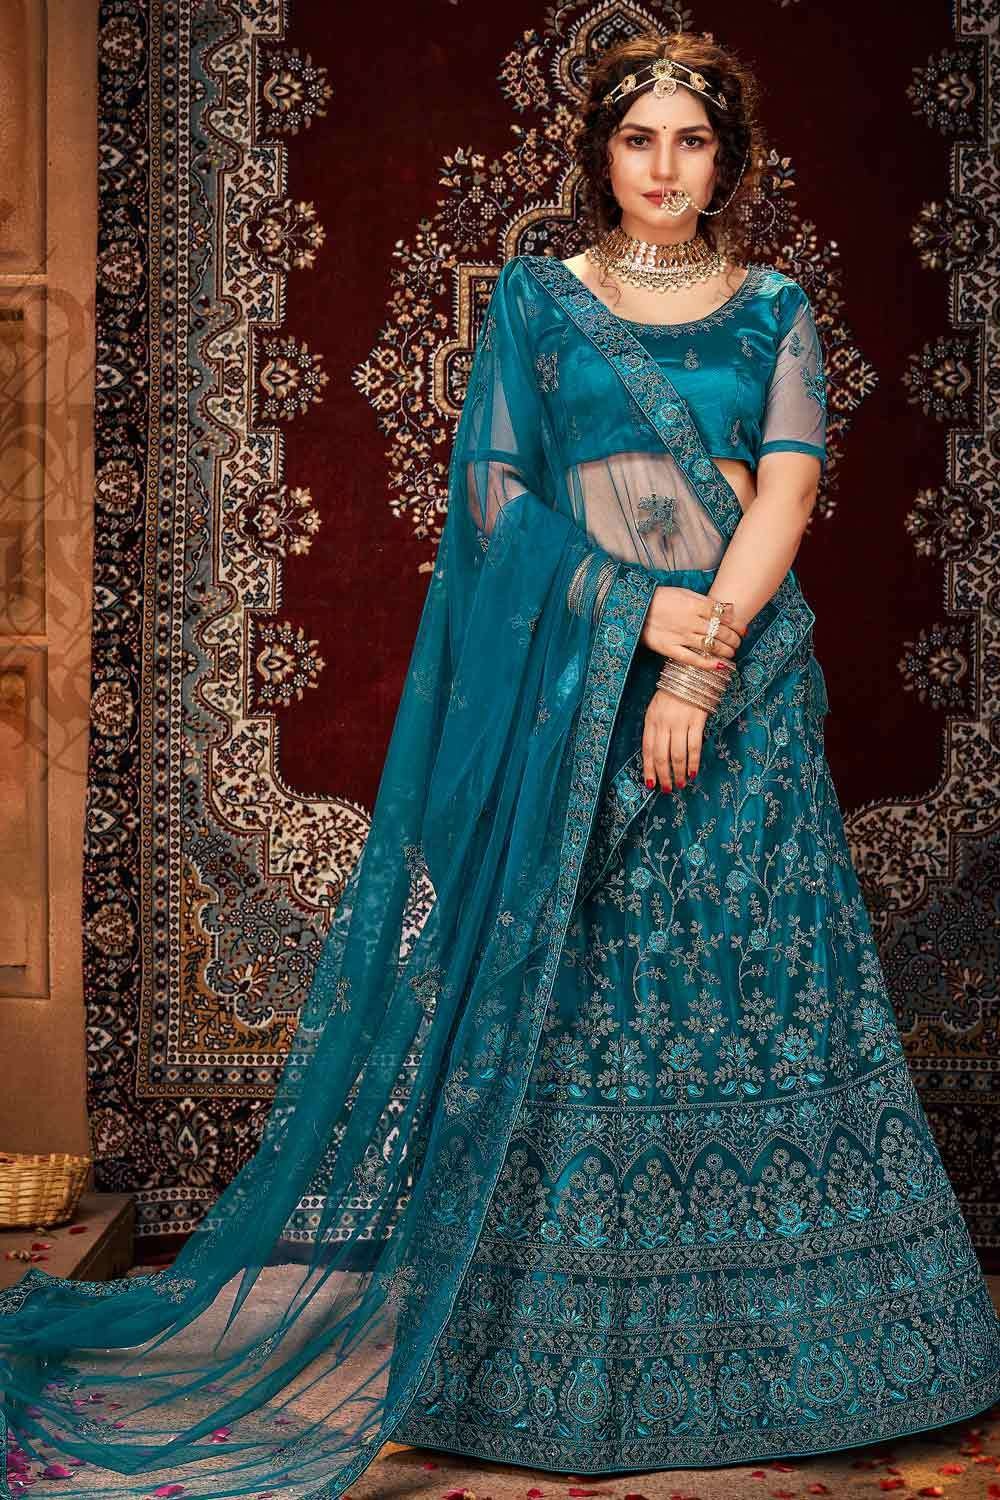 Circus of Love 💙 . Found this beautiful blue lehenga at  @surabhichopralabel and the most stunning jewellery set from… | Instagram